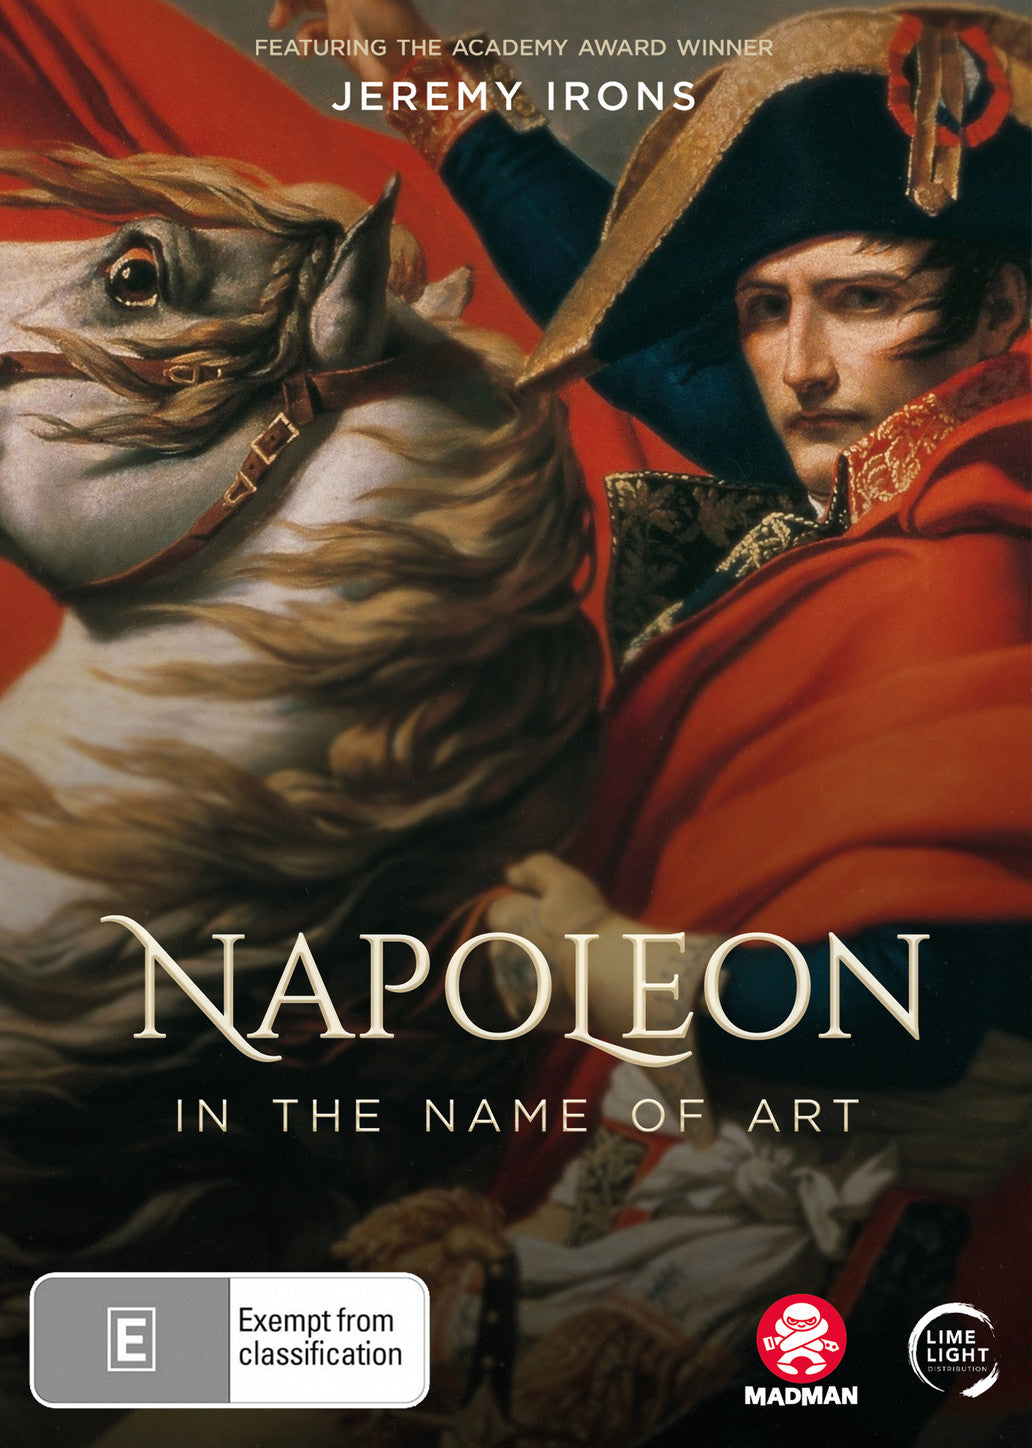 NAPOLEON: IN THE NAME OF ART